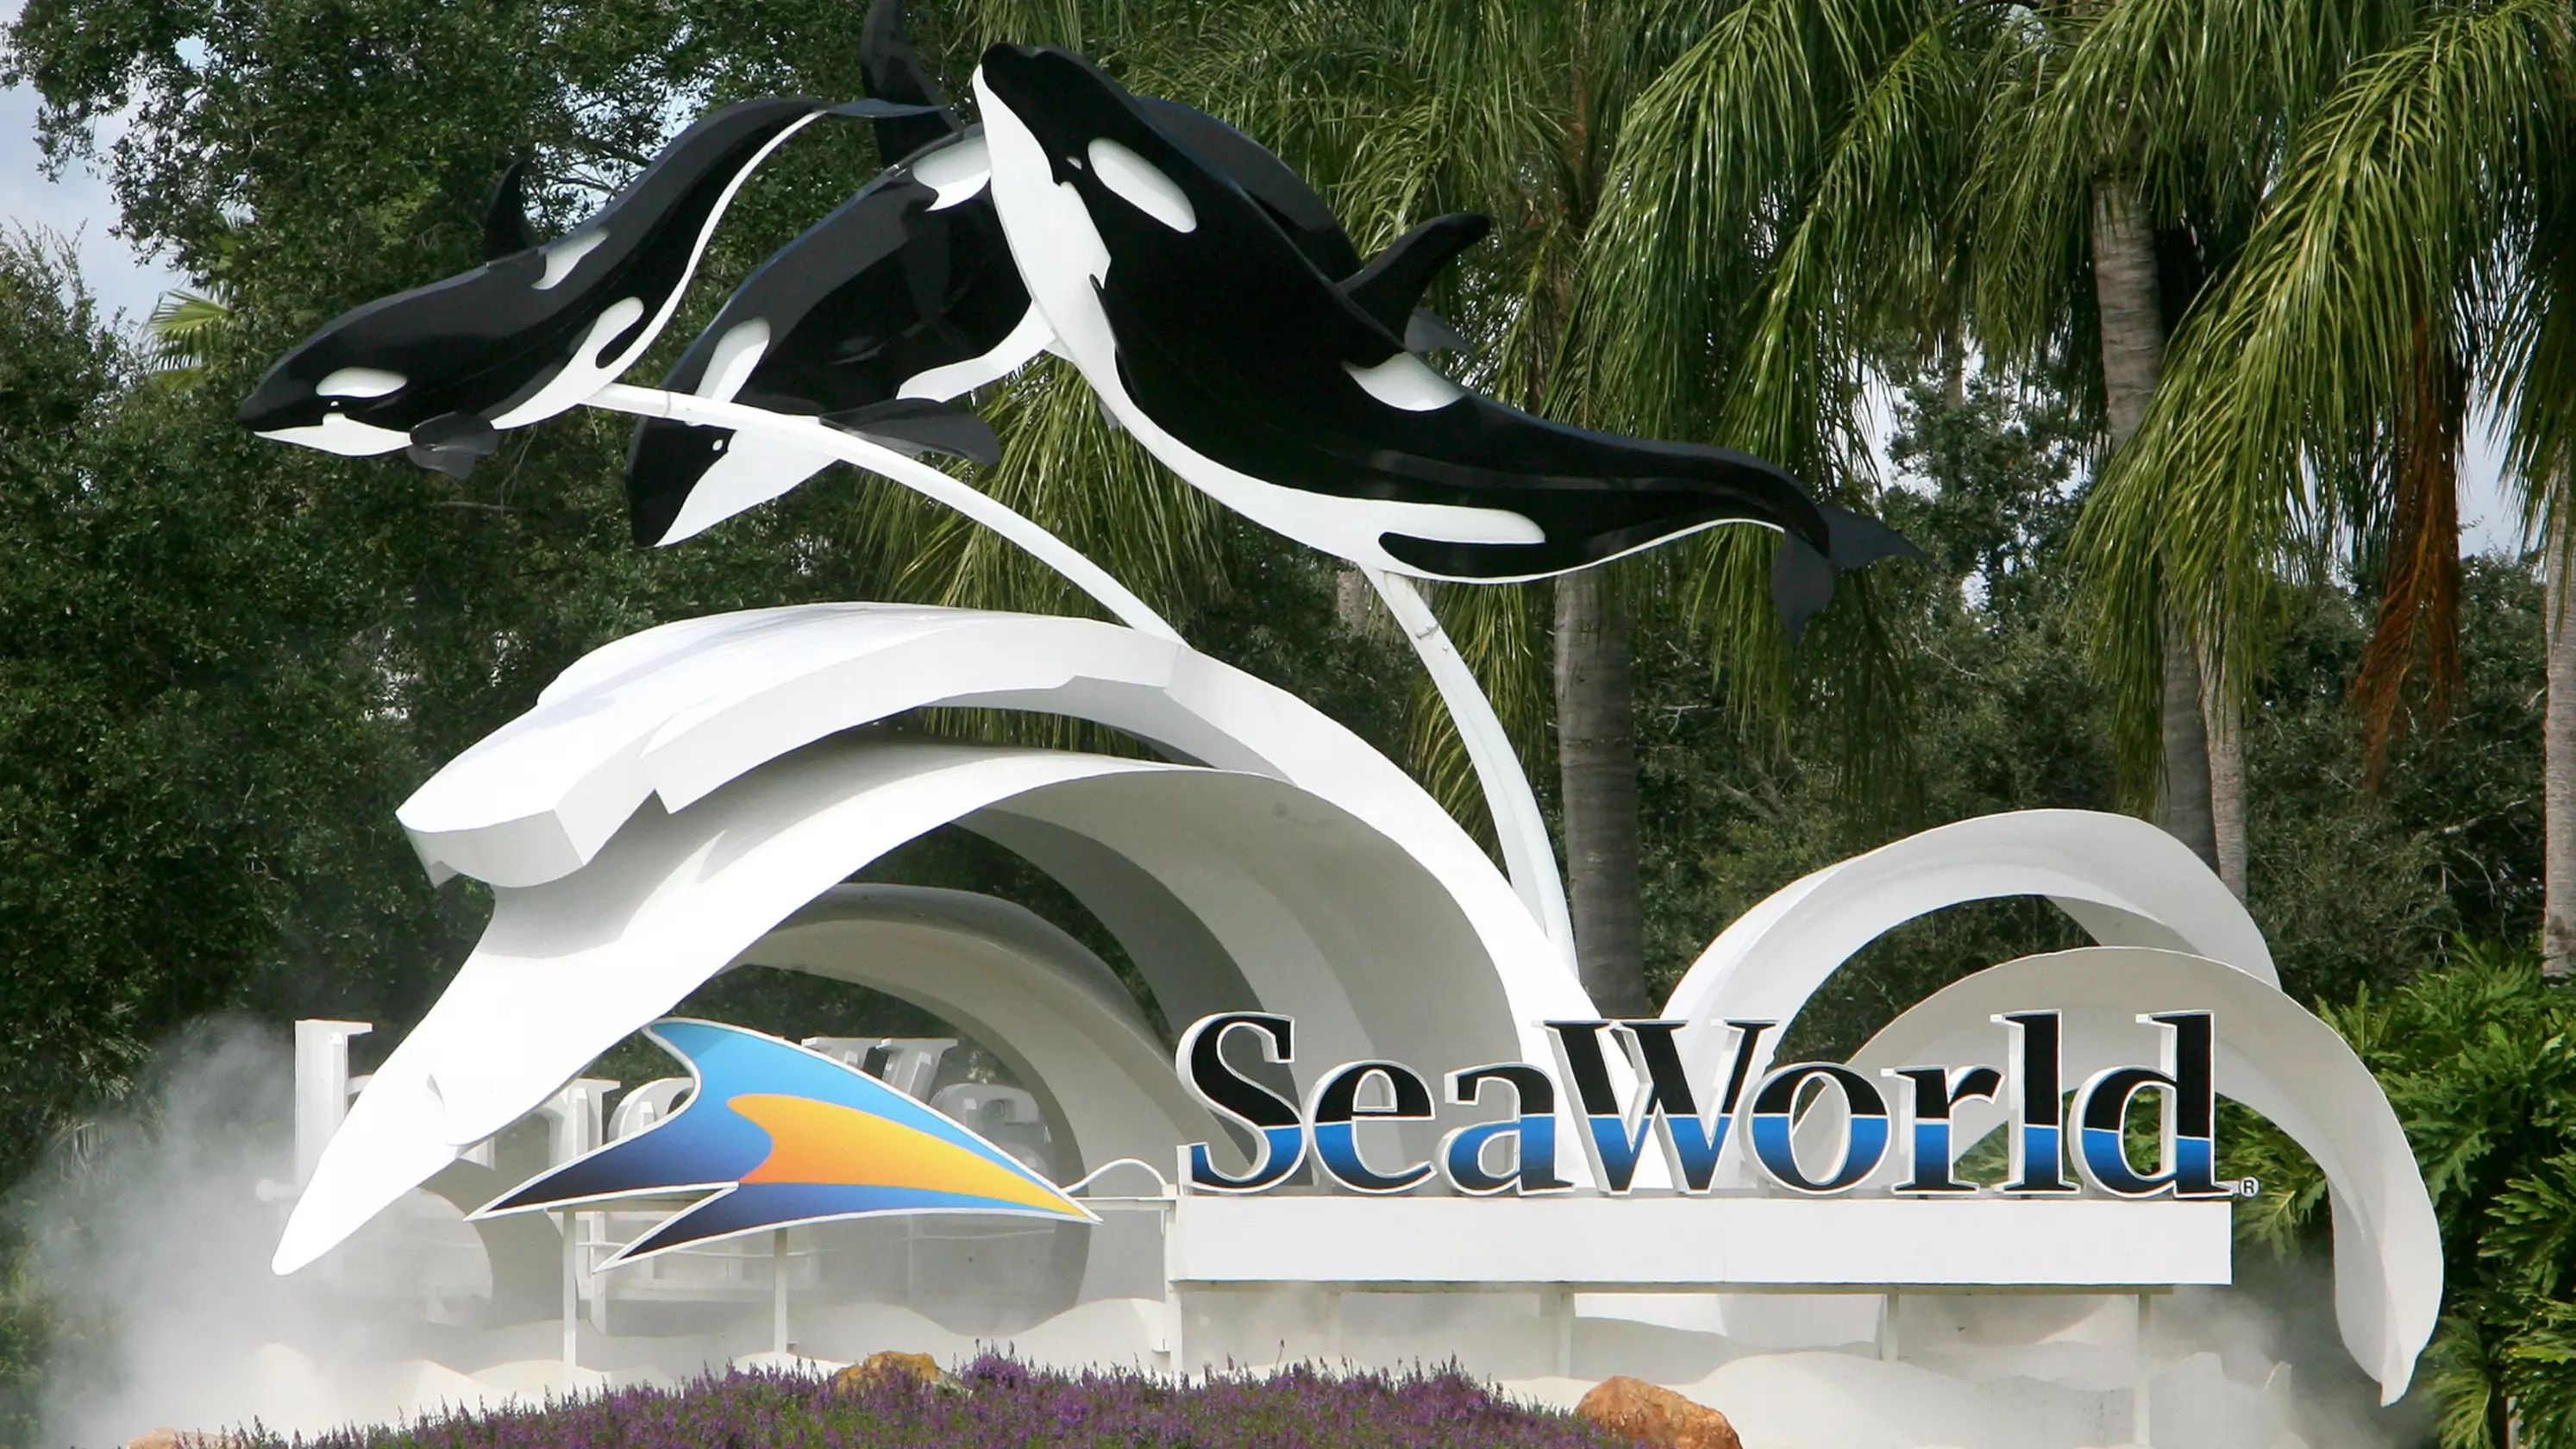 Thomas Cook To Stop Selling Tickets To SeaWorld Over Animal Welfare Concerns